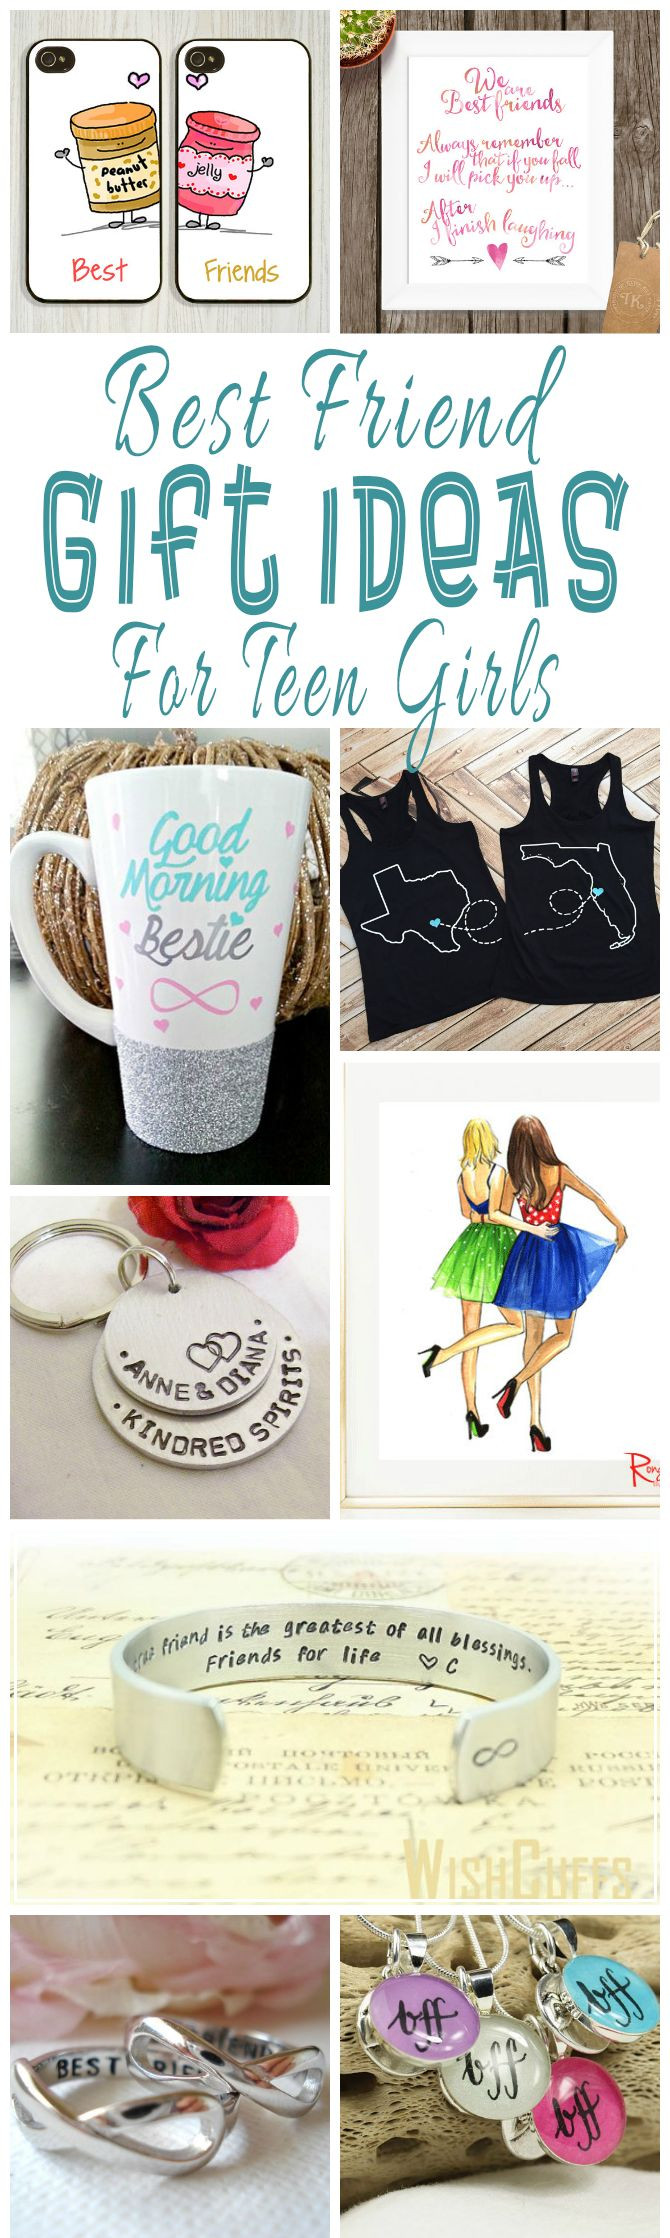 DIY Birthday Gifts For Best Friend Girl
 Best Friend Gift Ideas For Teens